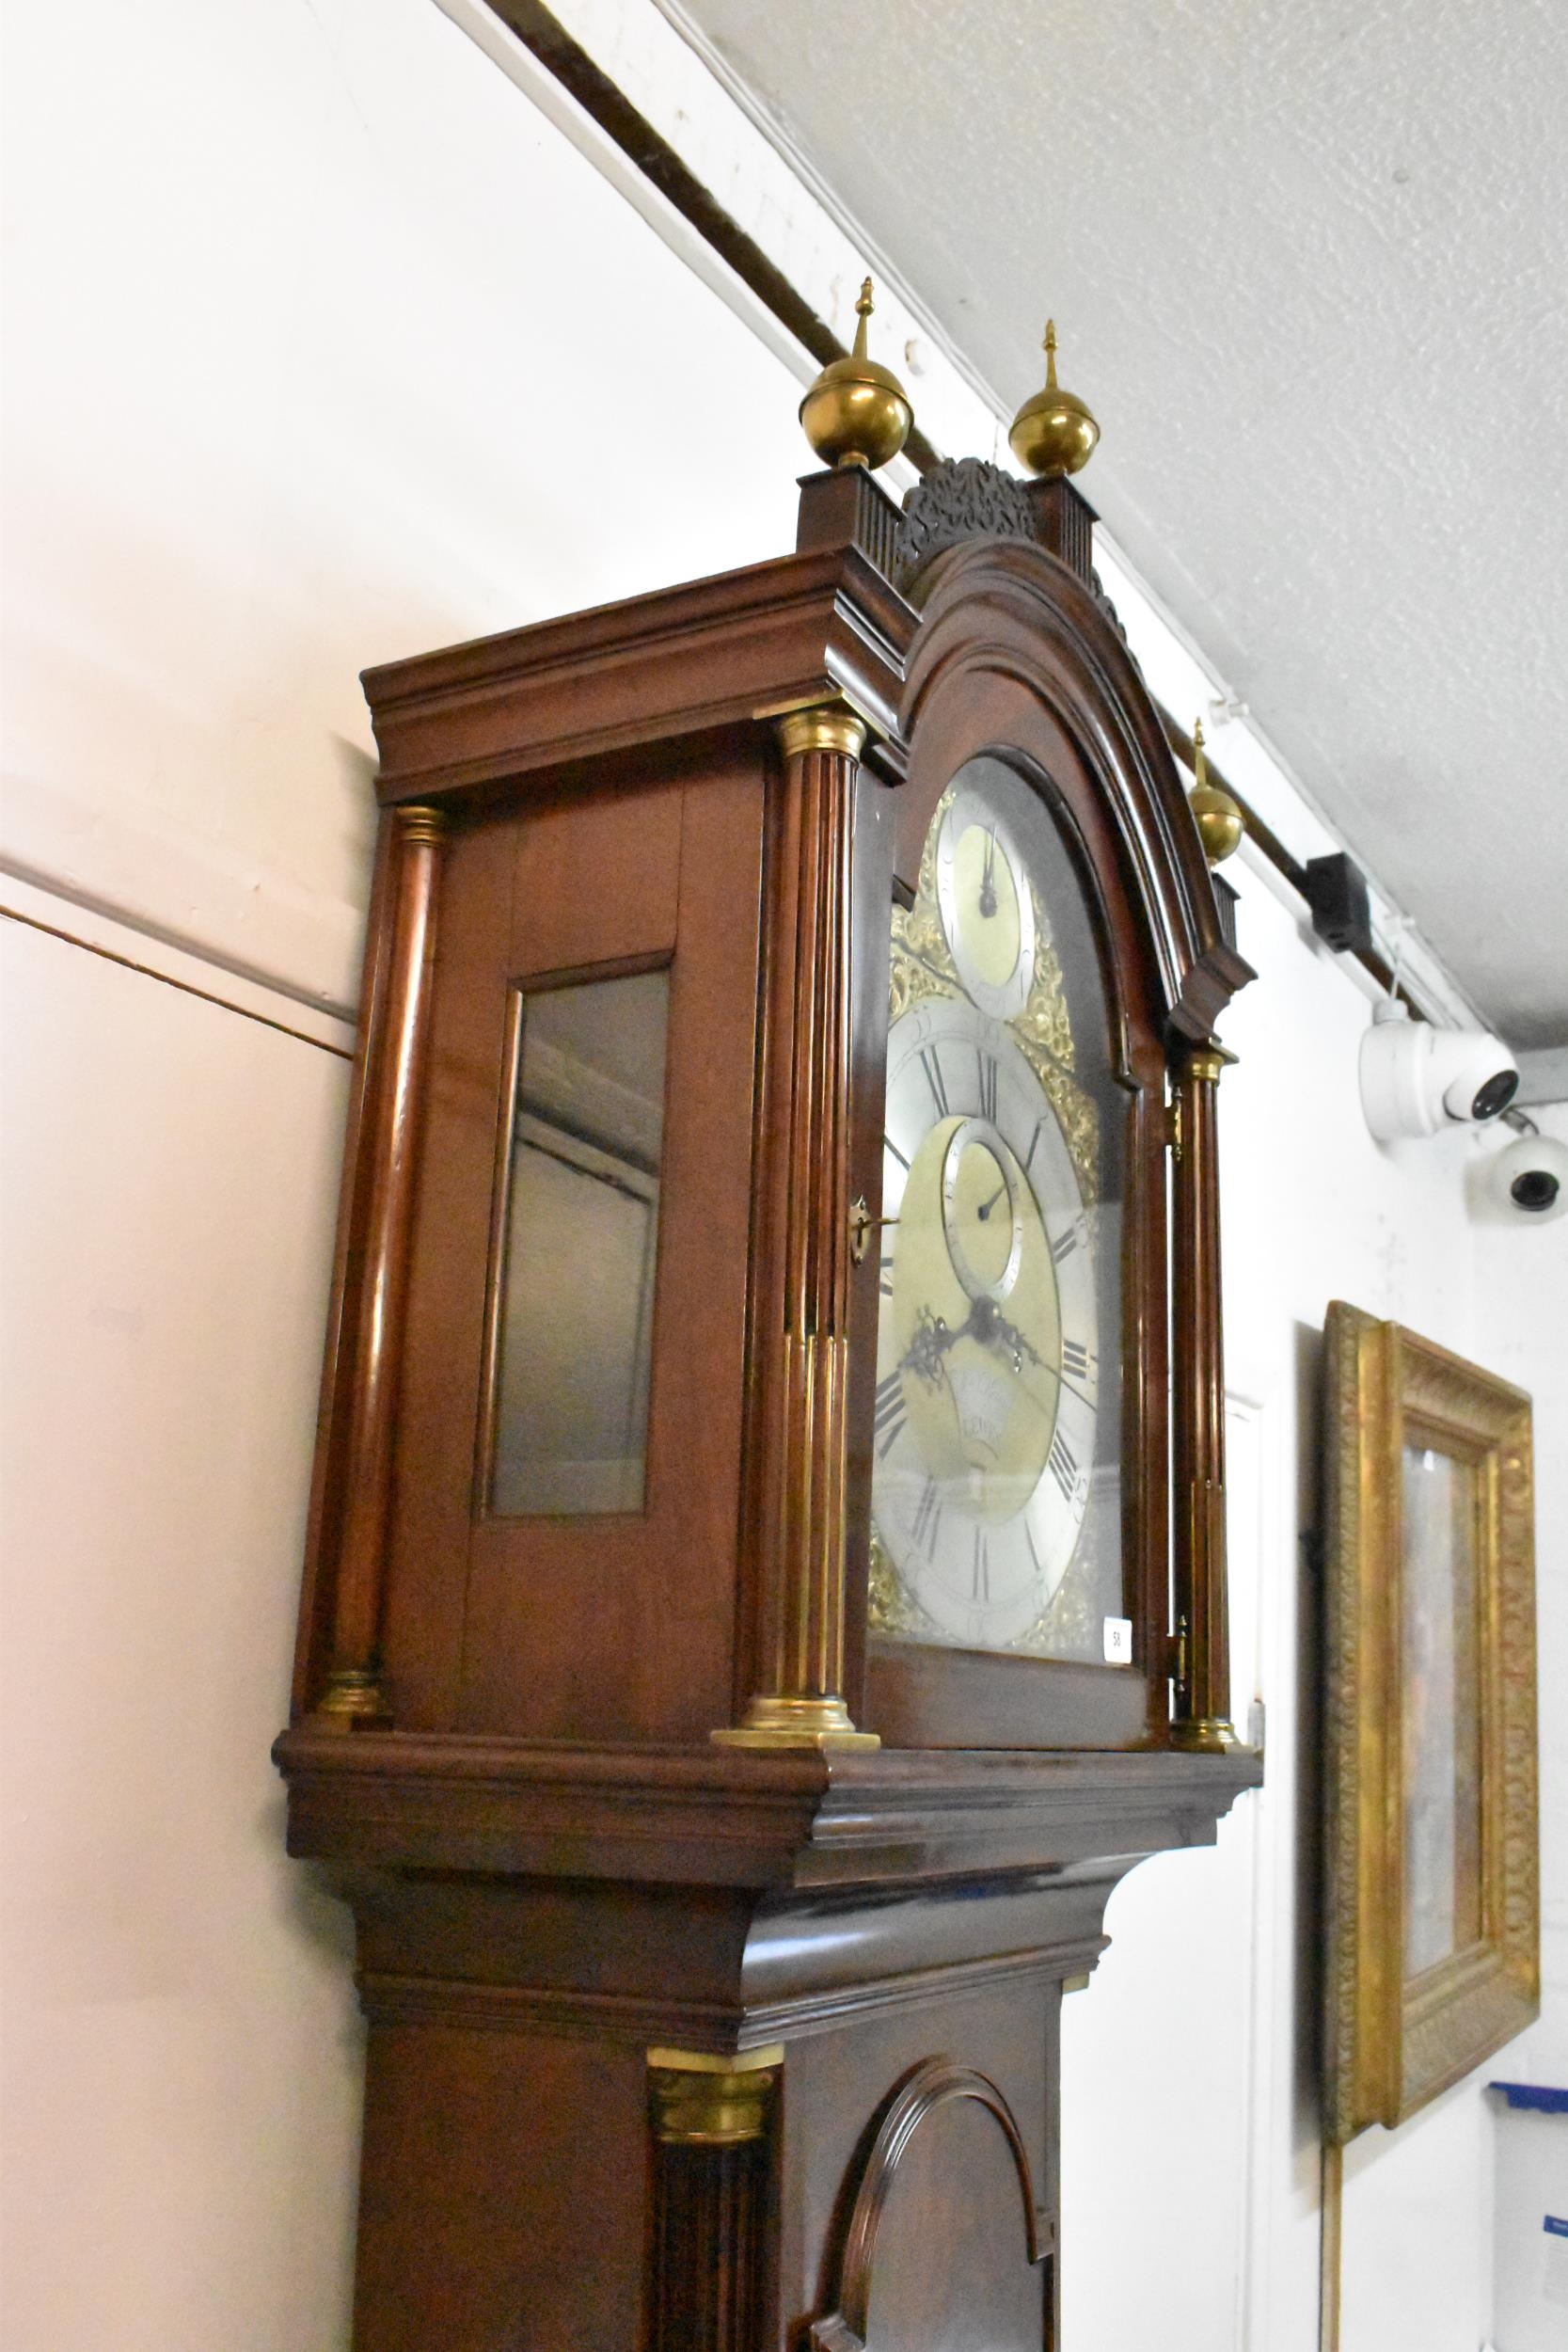 A George III mahogany longcase clock, the case having an arched top with three ball and spike - Image 8 of 9